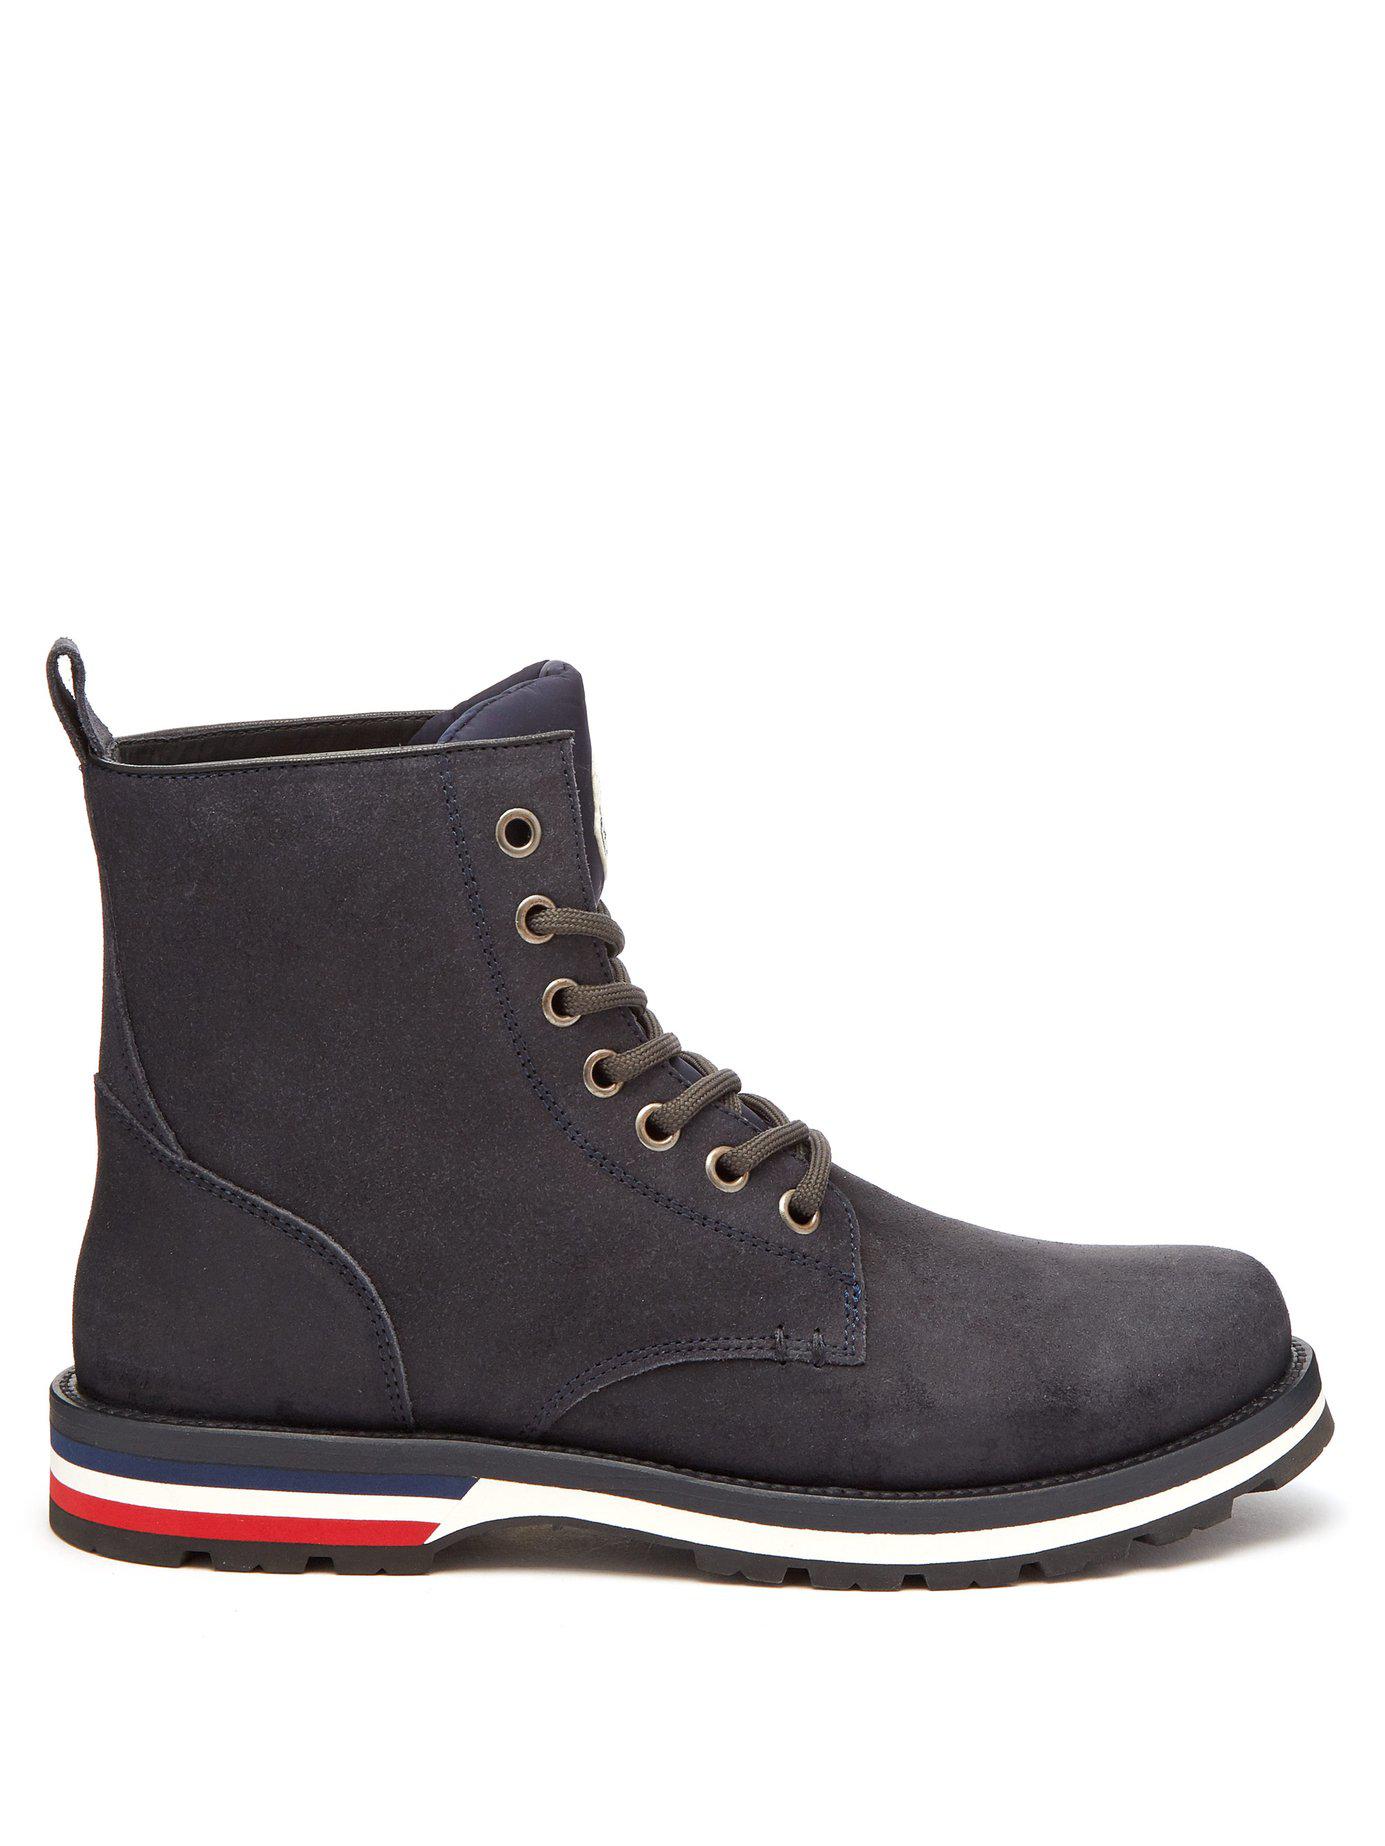 Moncler Men's New Vancouver Suede Boots in Blue for Men - Lyst